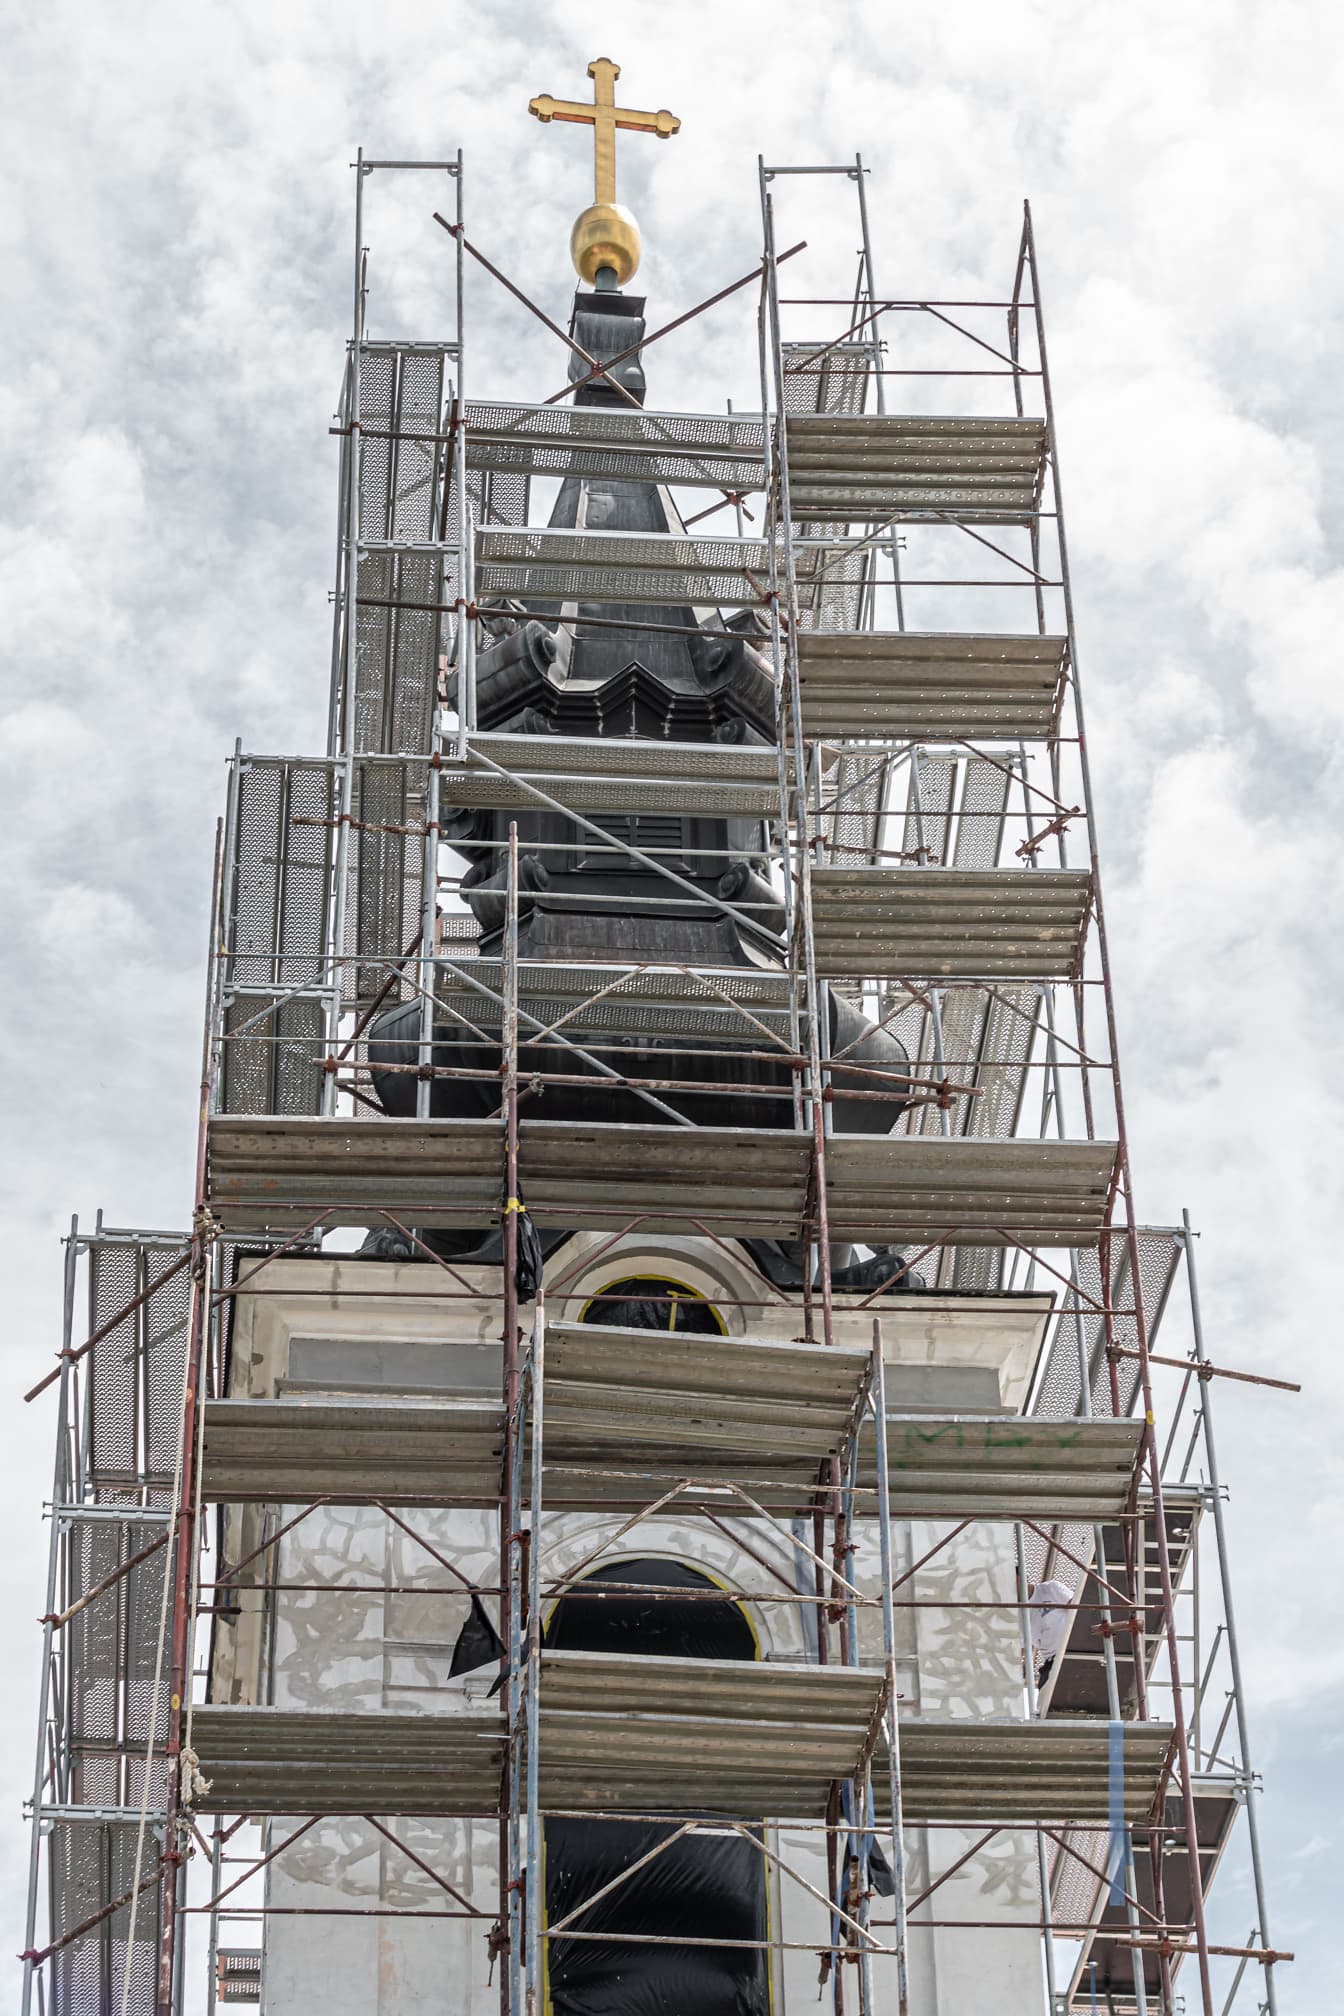 Reconstruction of church tower working at high workplace